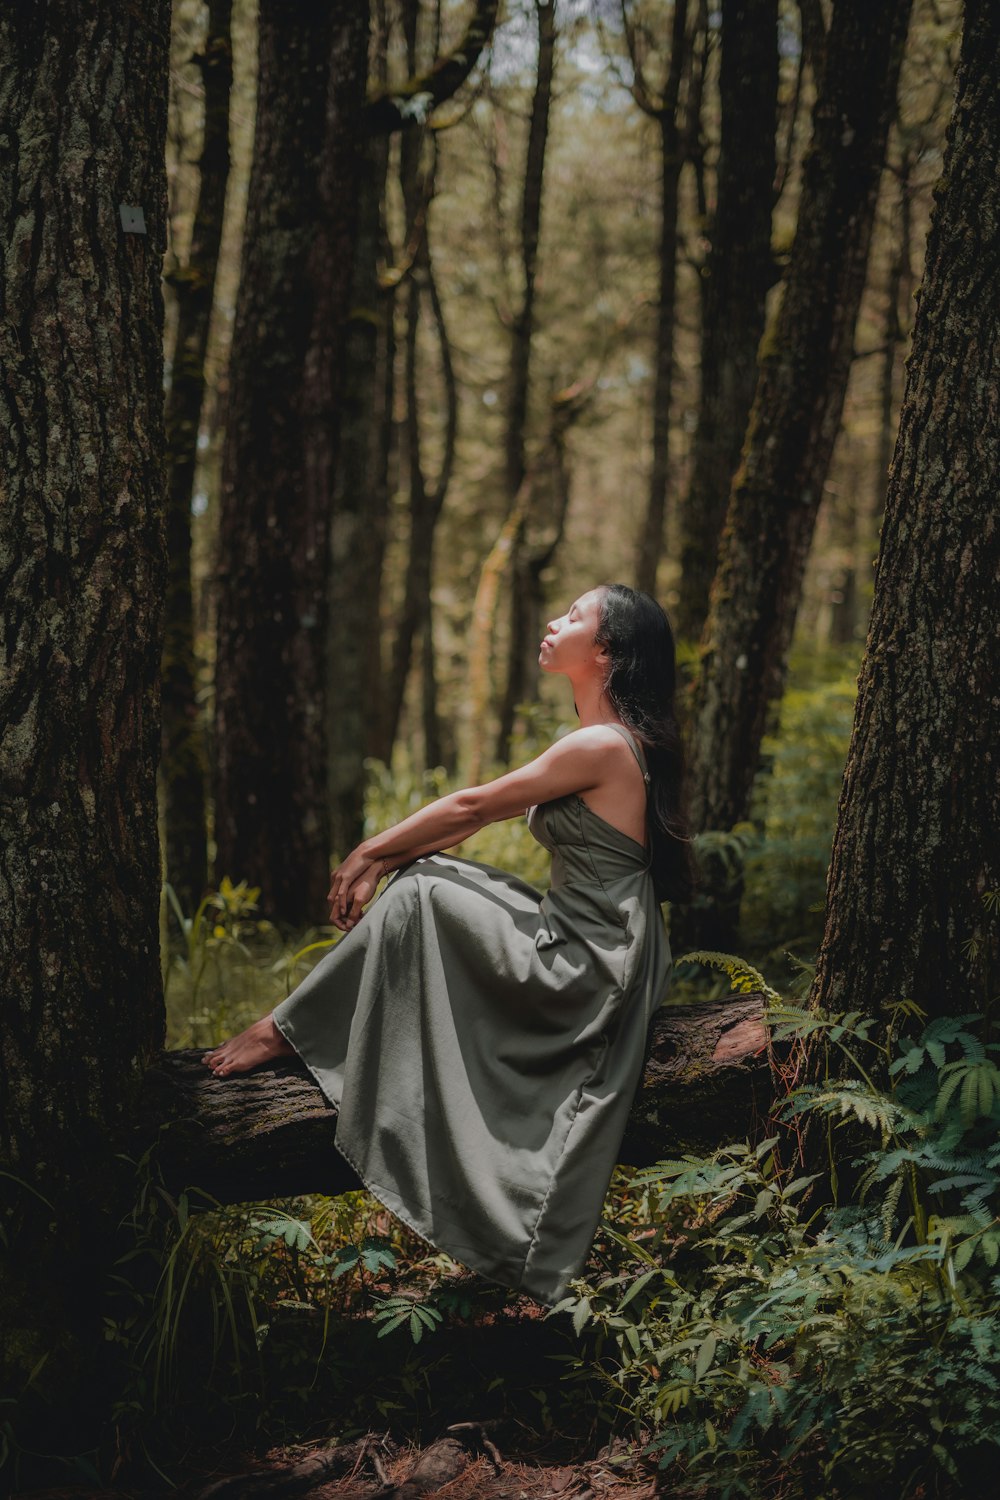 woman in black dress sitting on ground surrounded by trees